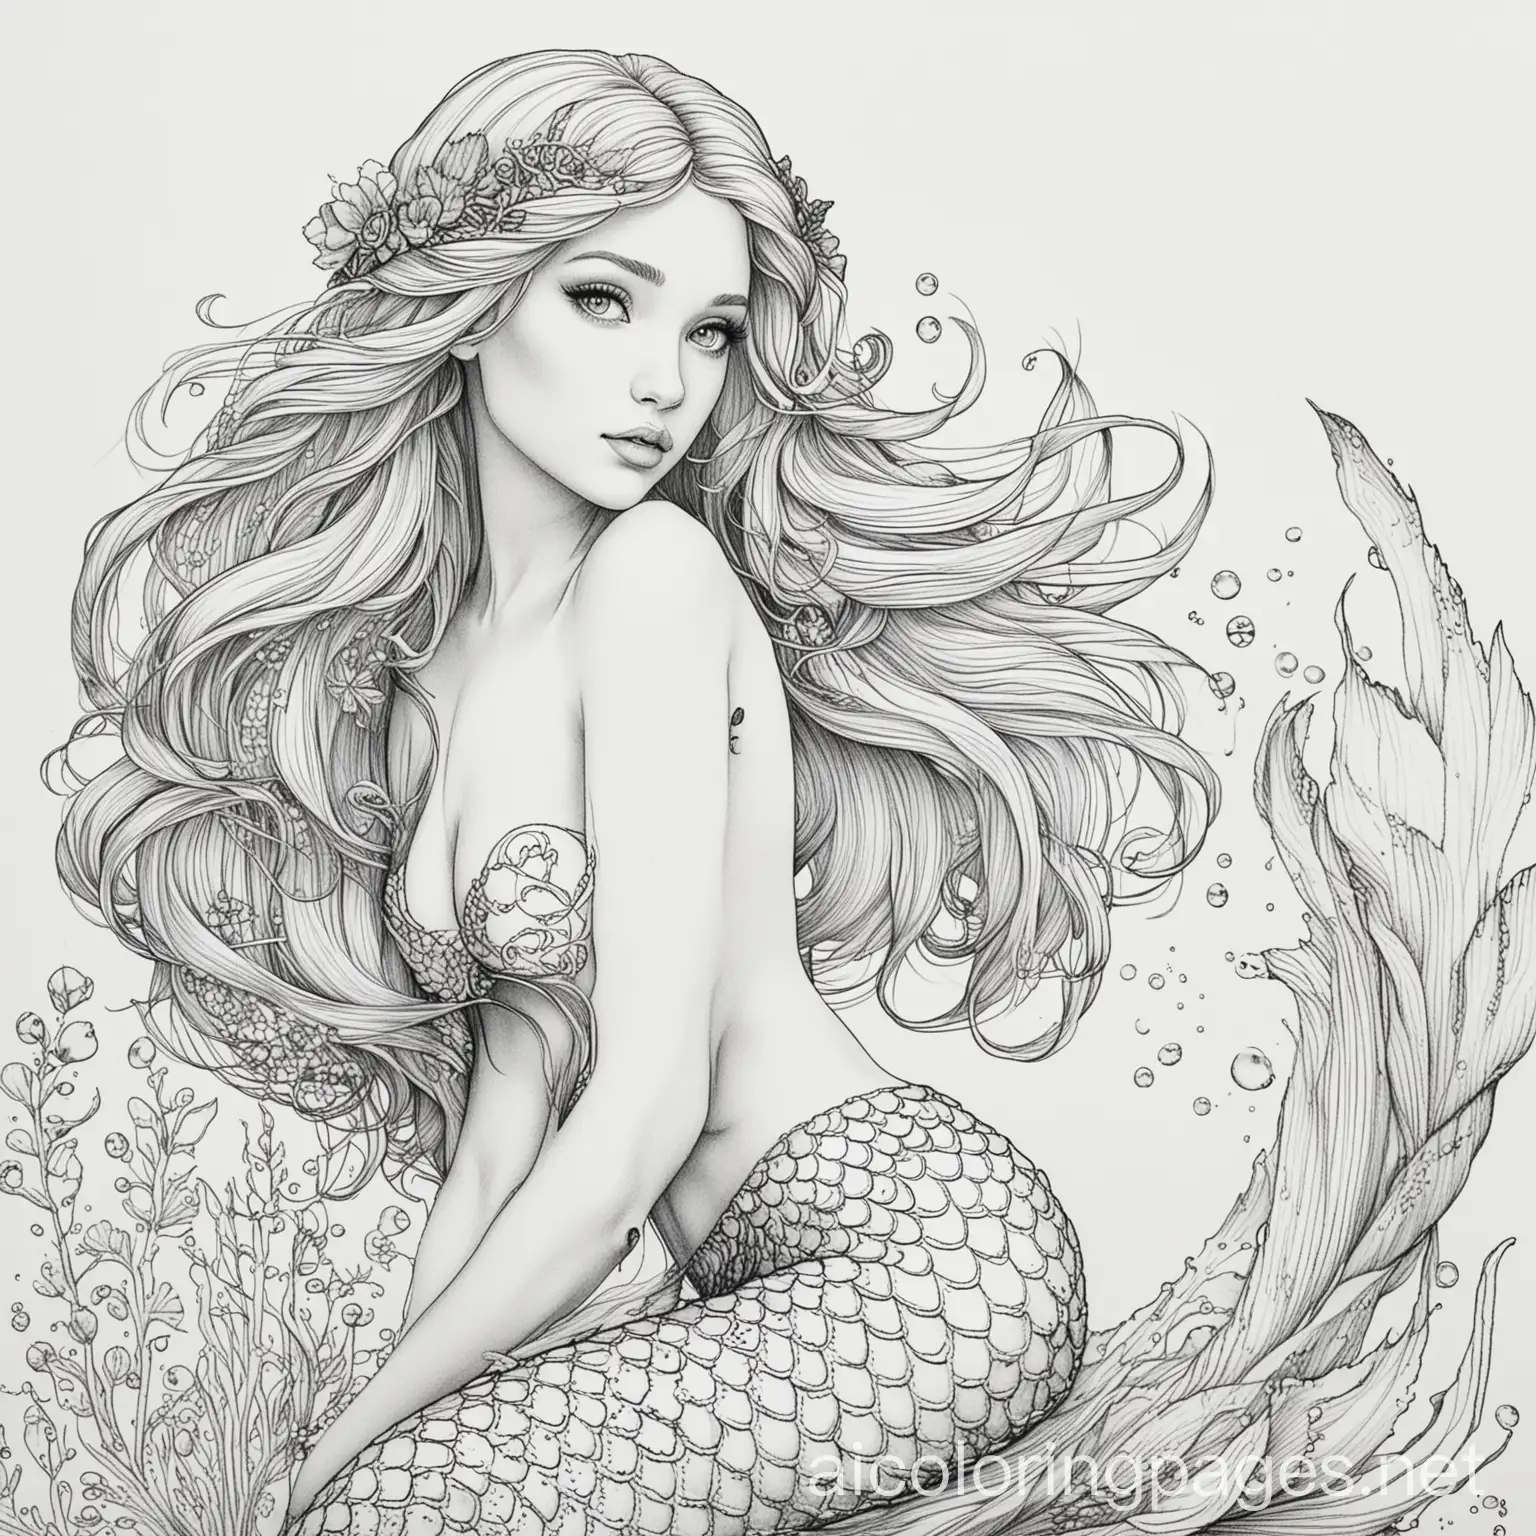 Mermaid-Coloring-Page-with-Simplicity-and-Ample-White-Space